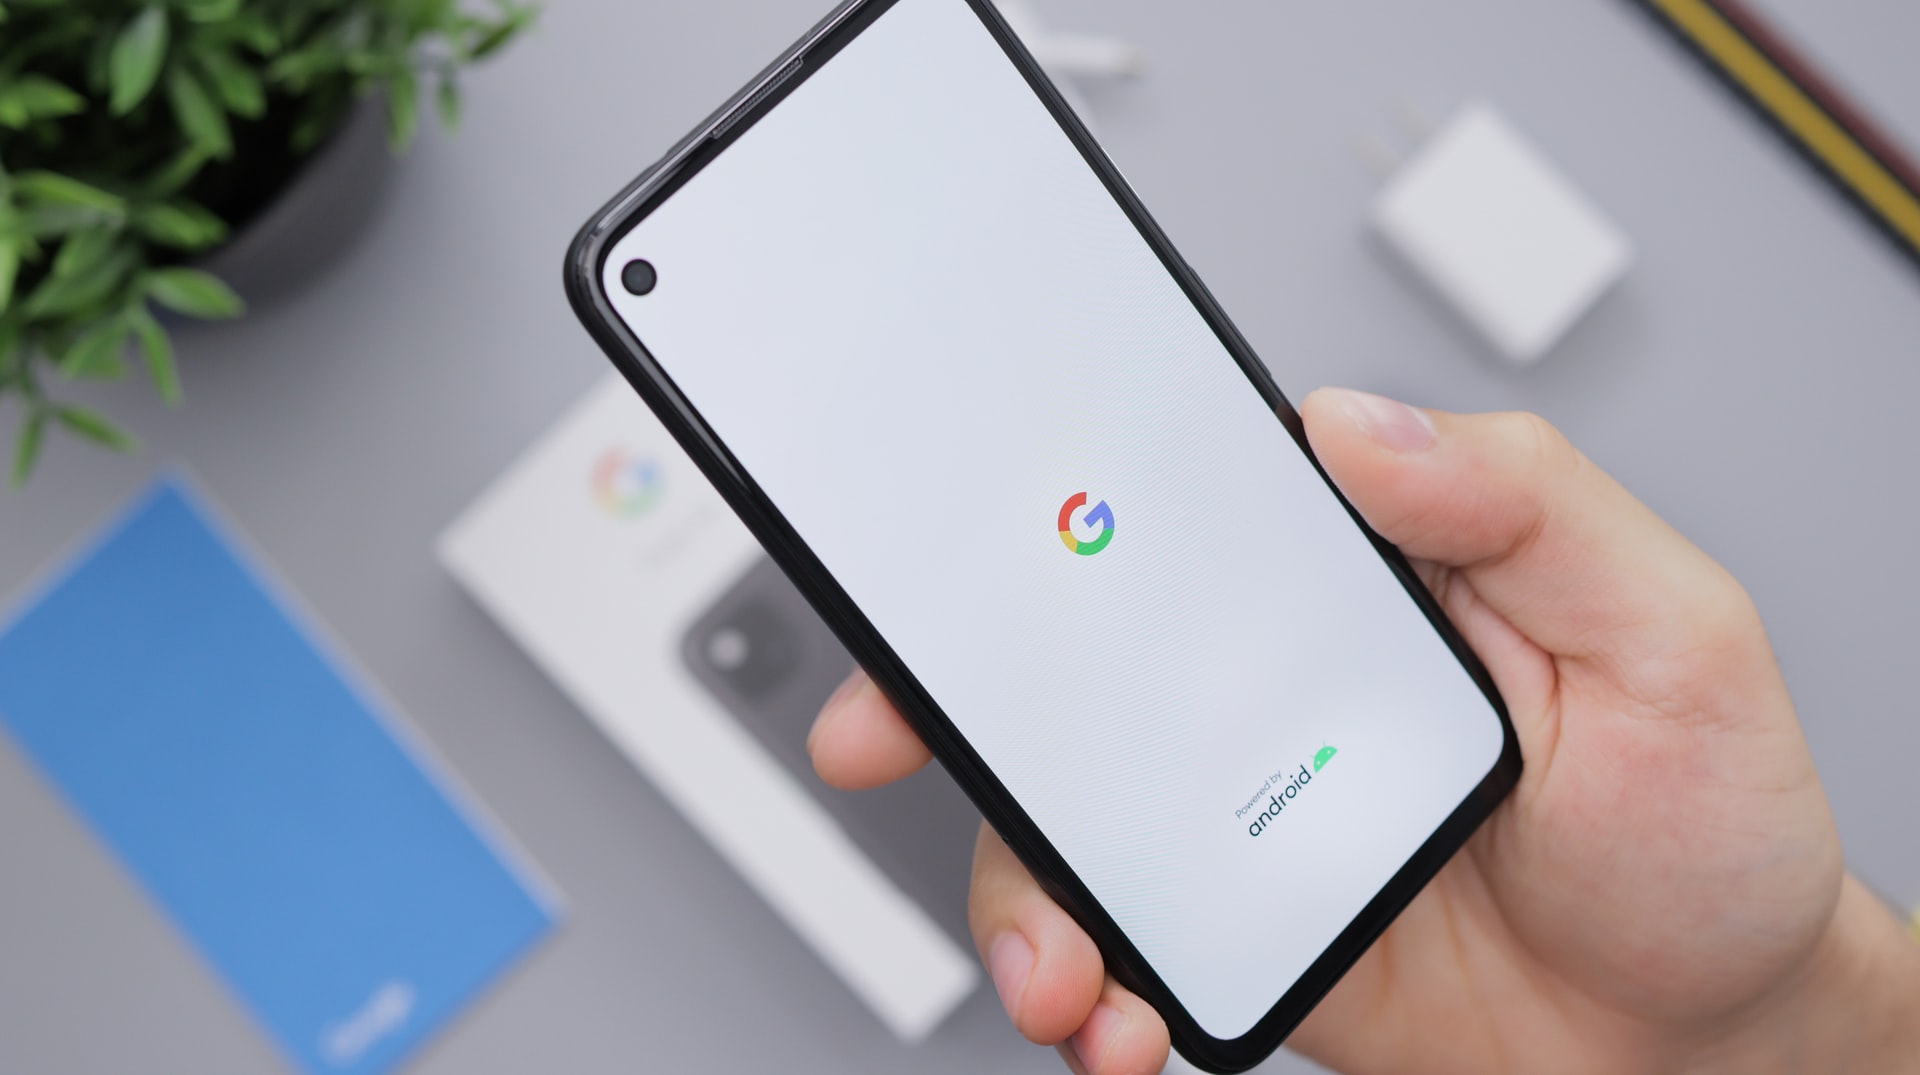 What you need to know about the Google Pixel 5a